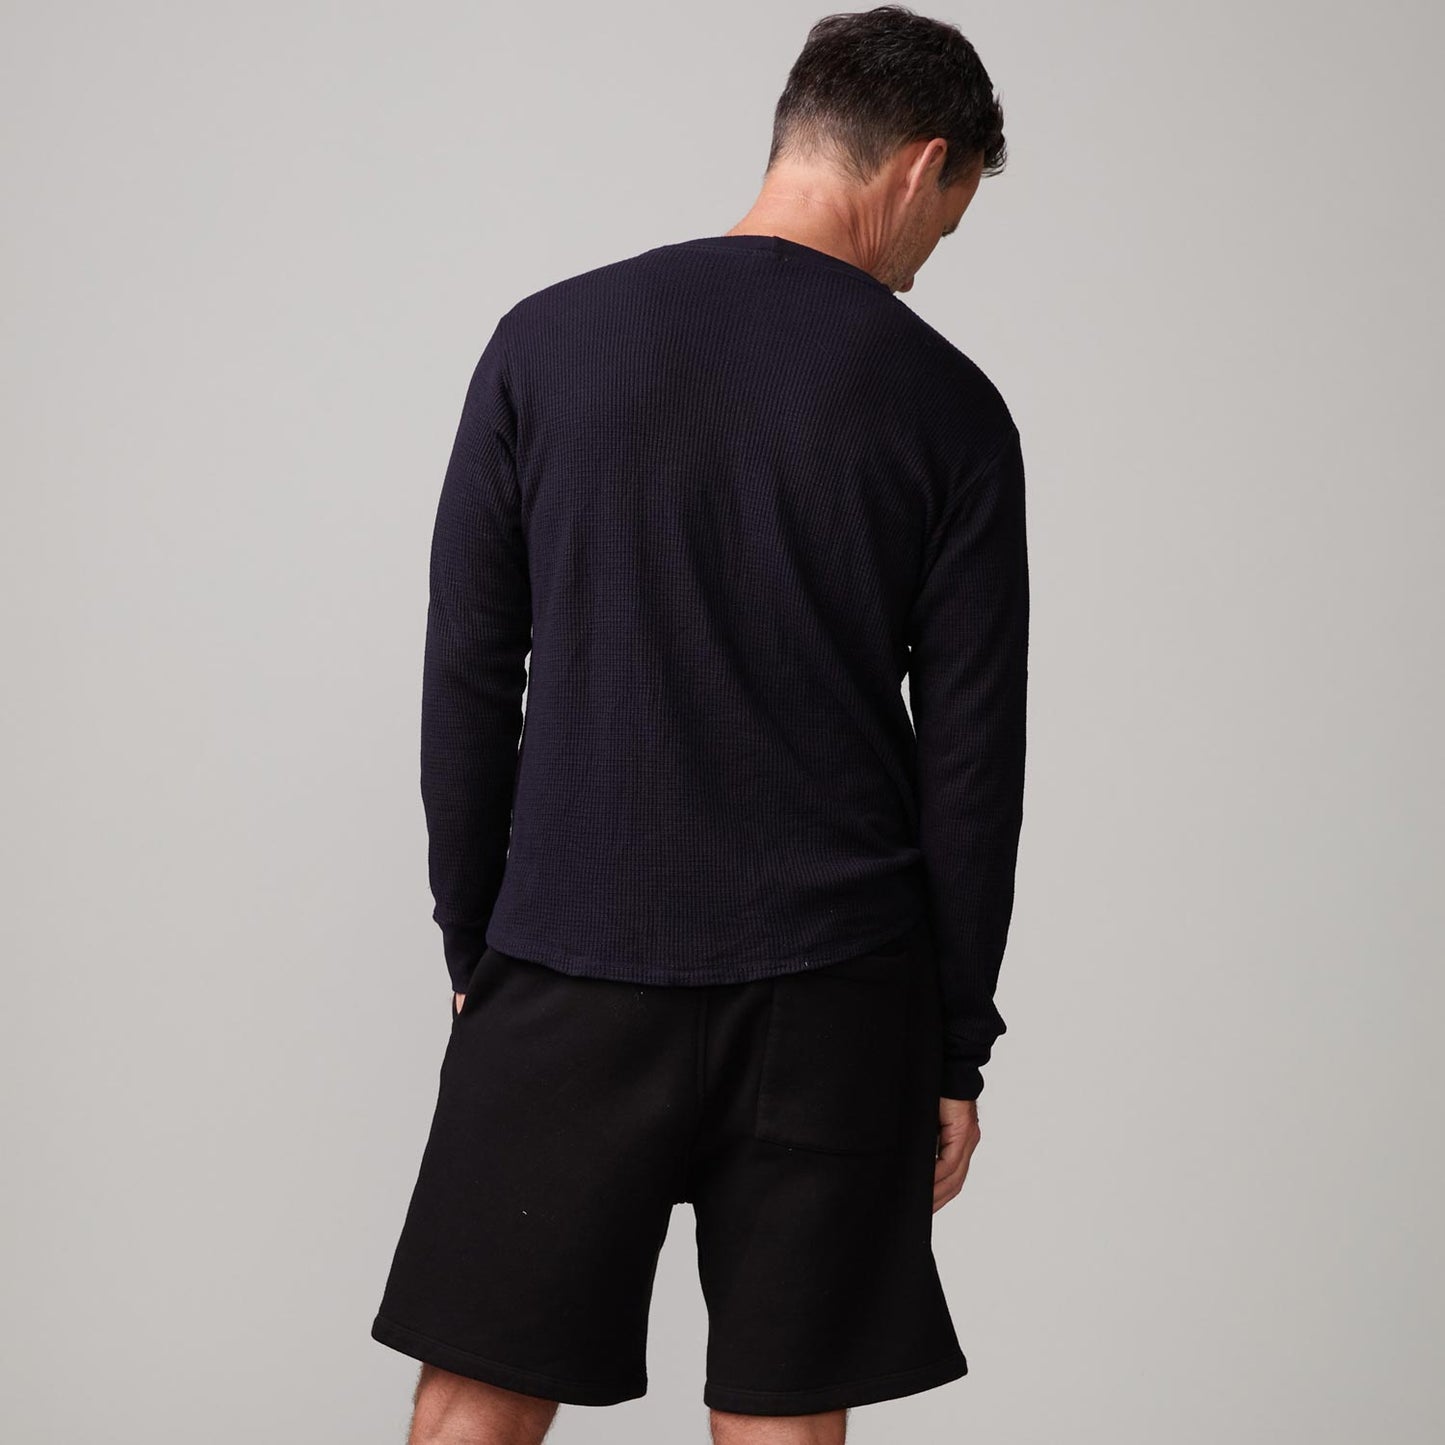 Back view of model wearing the thermal long sleeve crew in black.